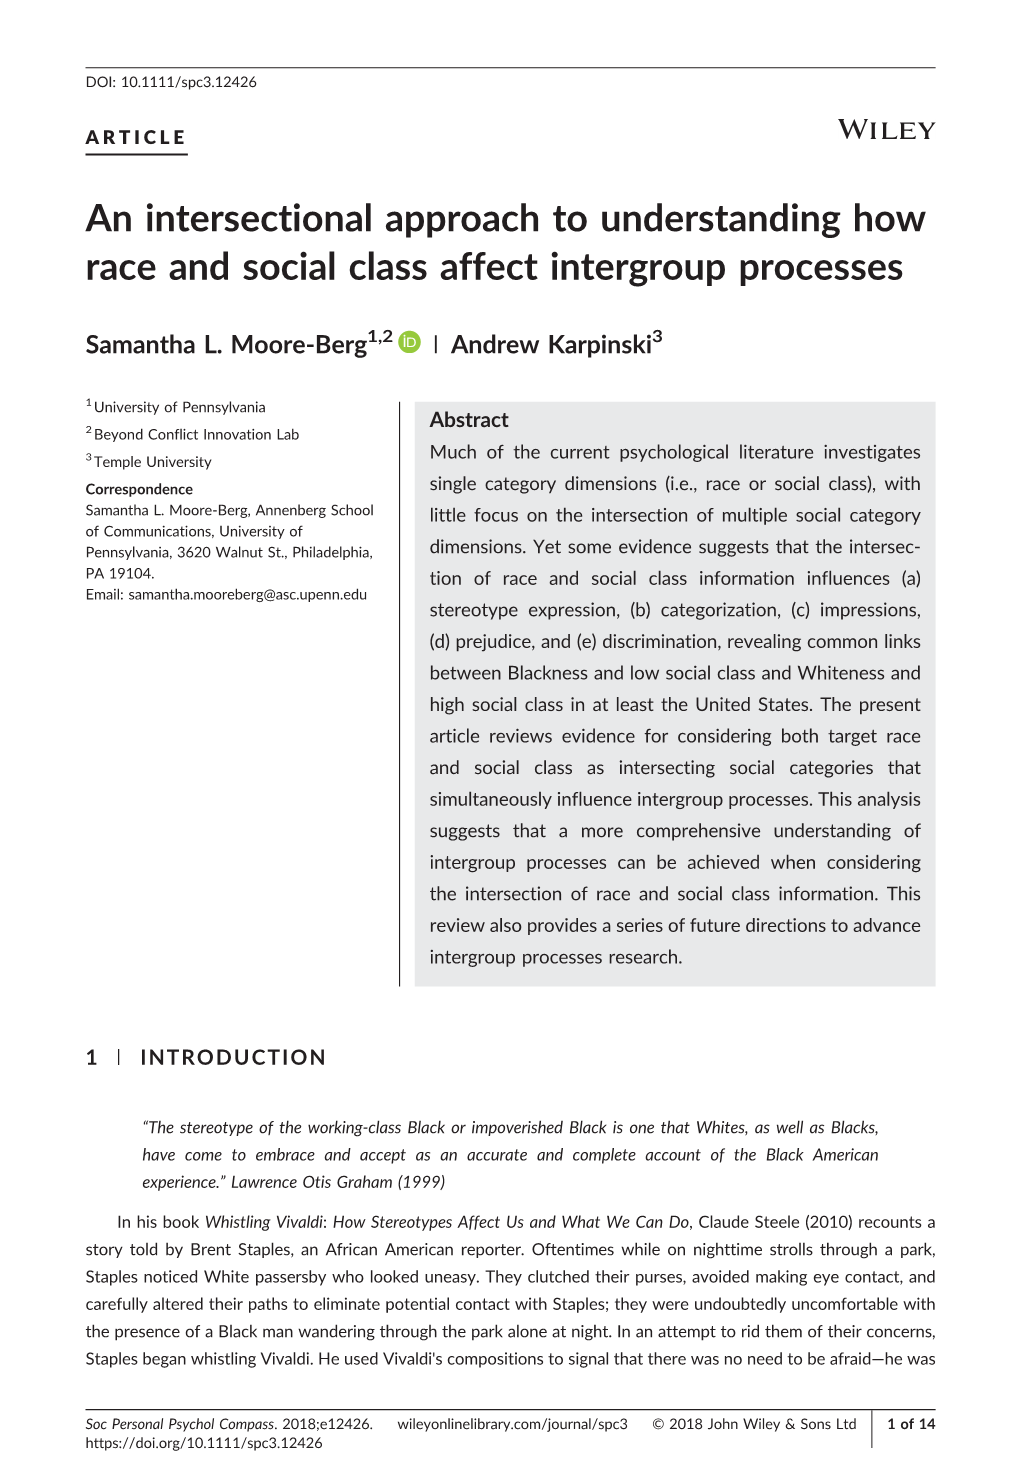 An Intersectional Approach to Understanding How Race and Social Class Affect Intergroup Processes